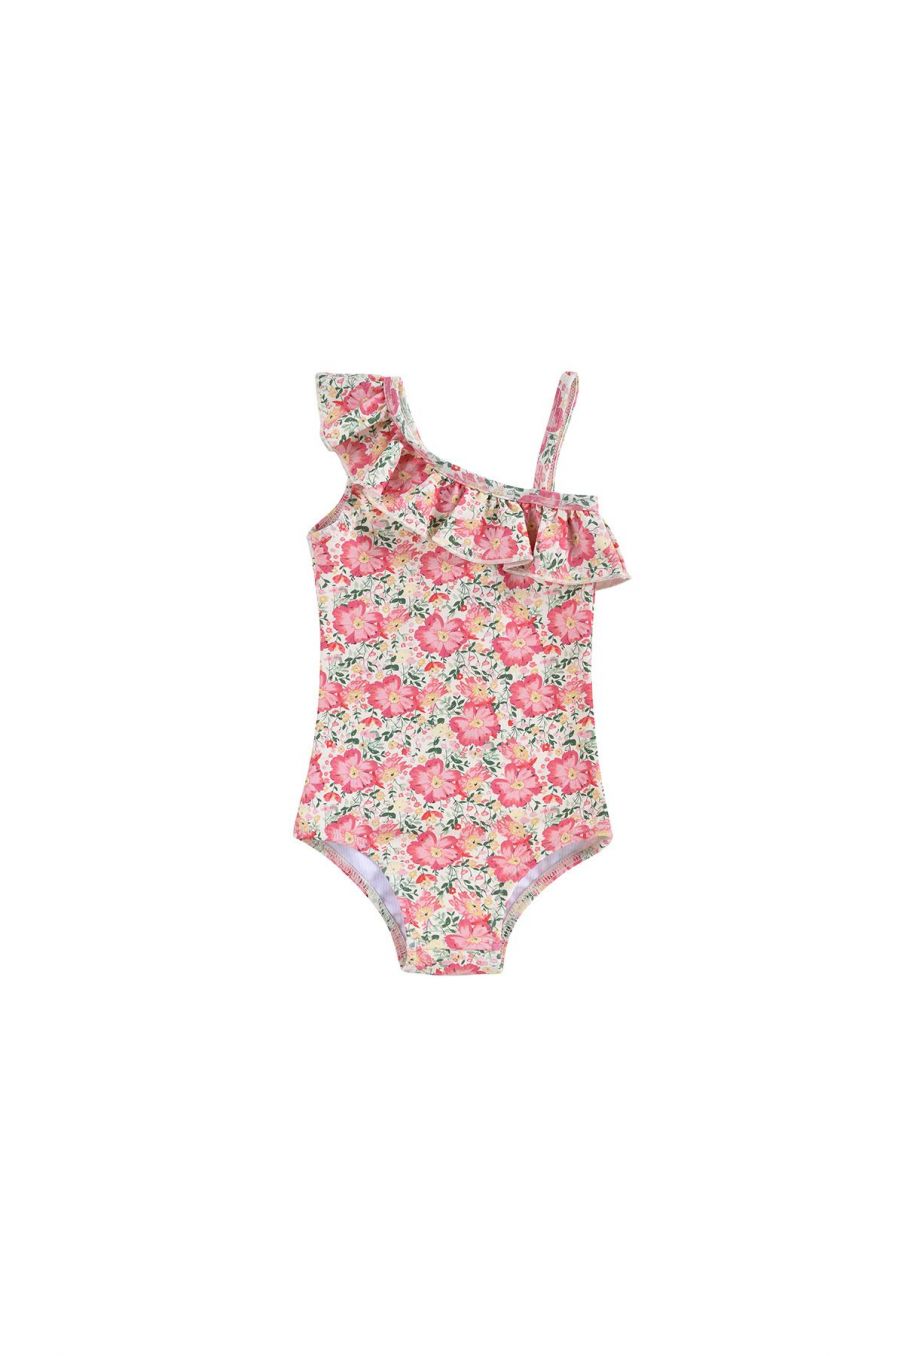 Bohemian Chic Vintage Bathing Suit For Baby Girl Louise Misha